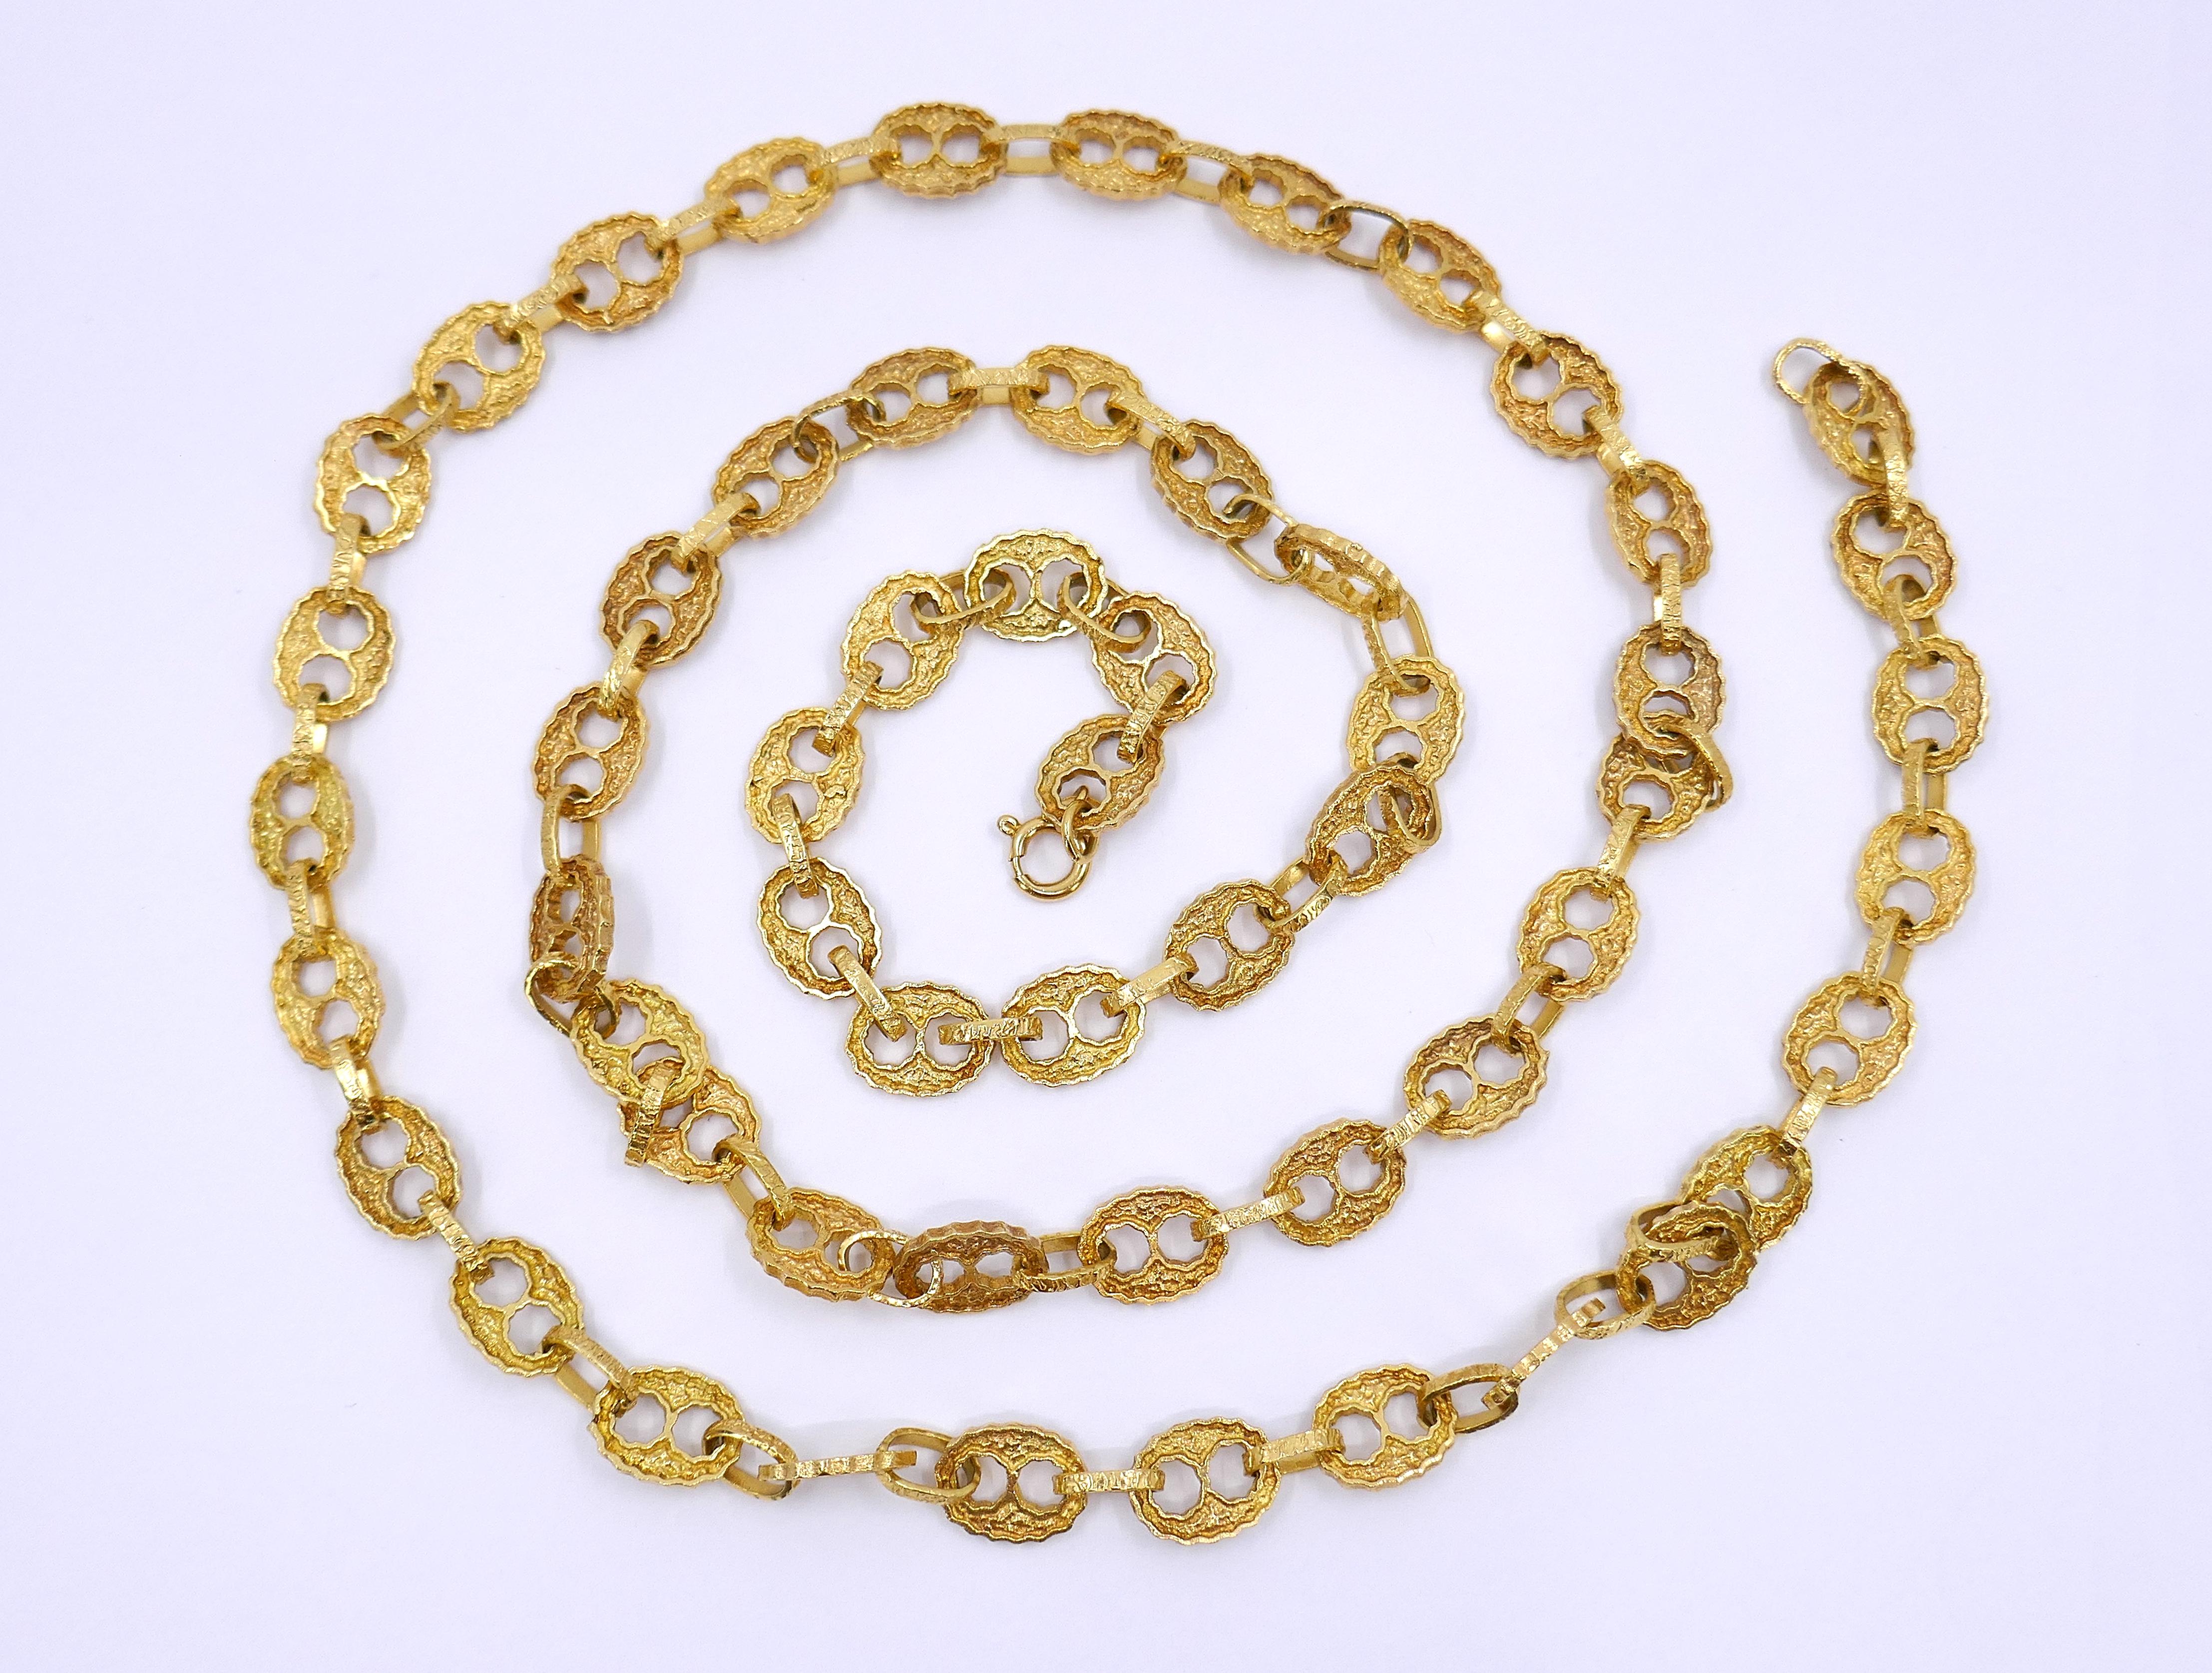 Introducing this Vintage Hammered Mariner Link Chain Necklace in 18K Gold, a striking piece with a unique history. The mariner link, known for its distinctive oval shape with a bar through the center, is an ode to maritime heritage, symbolizing